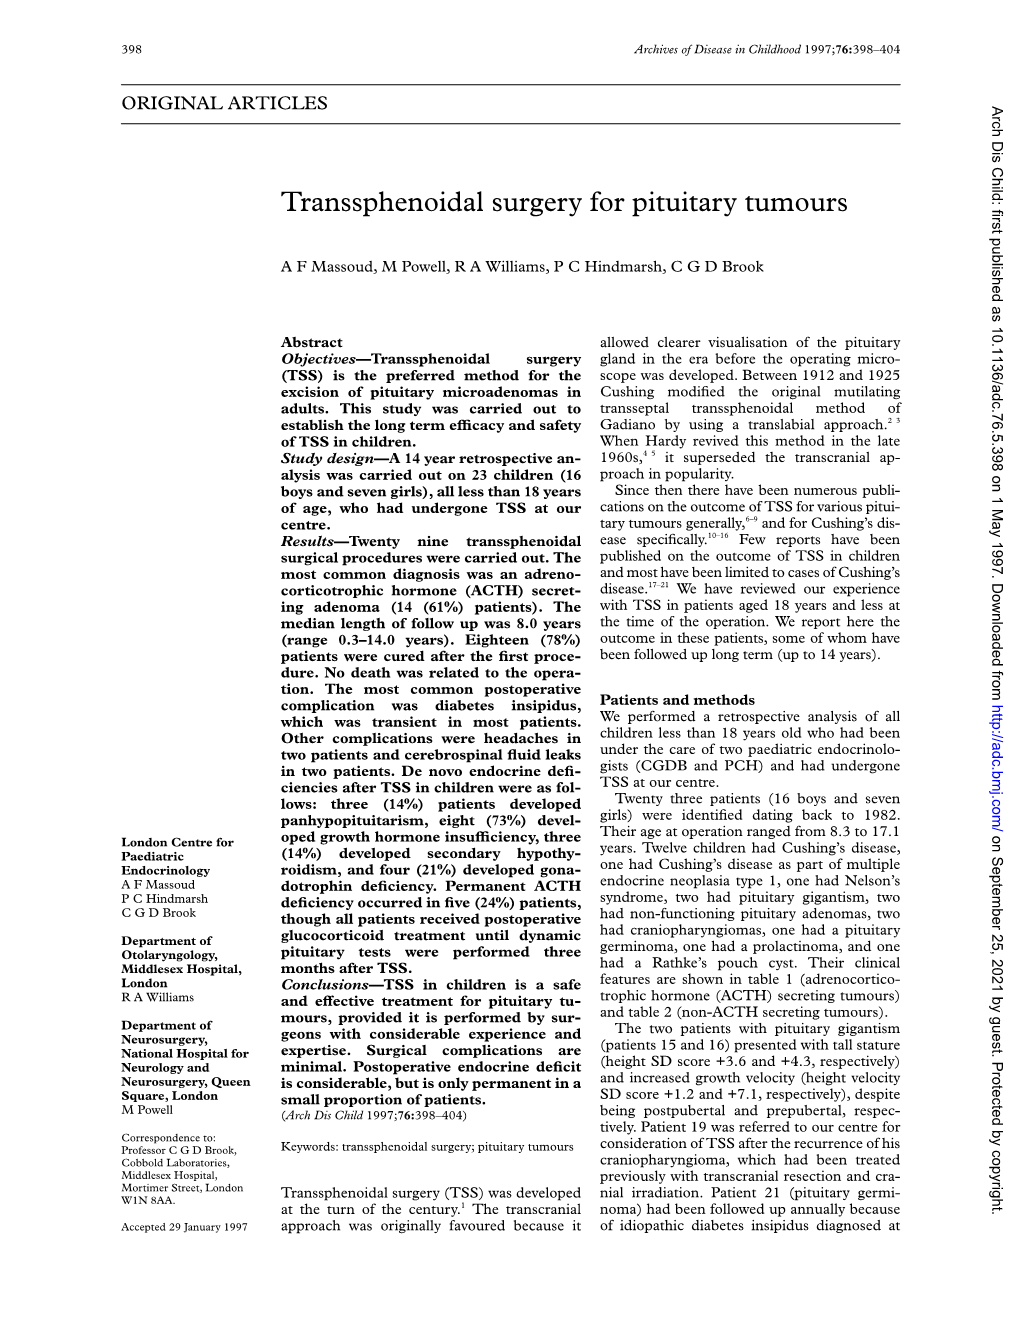 Transsphenoidal Surgery for Pituitary Tumours